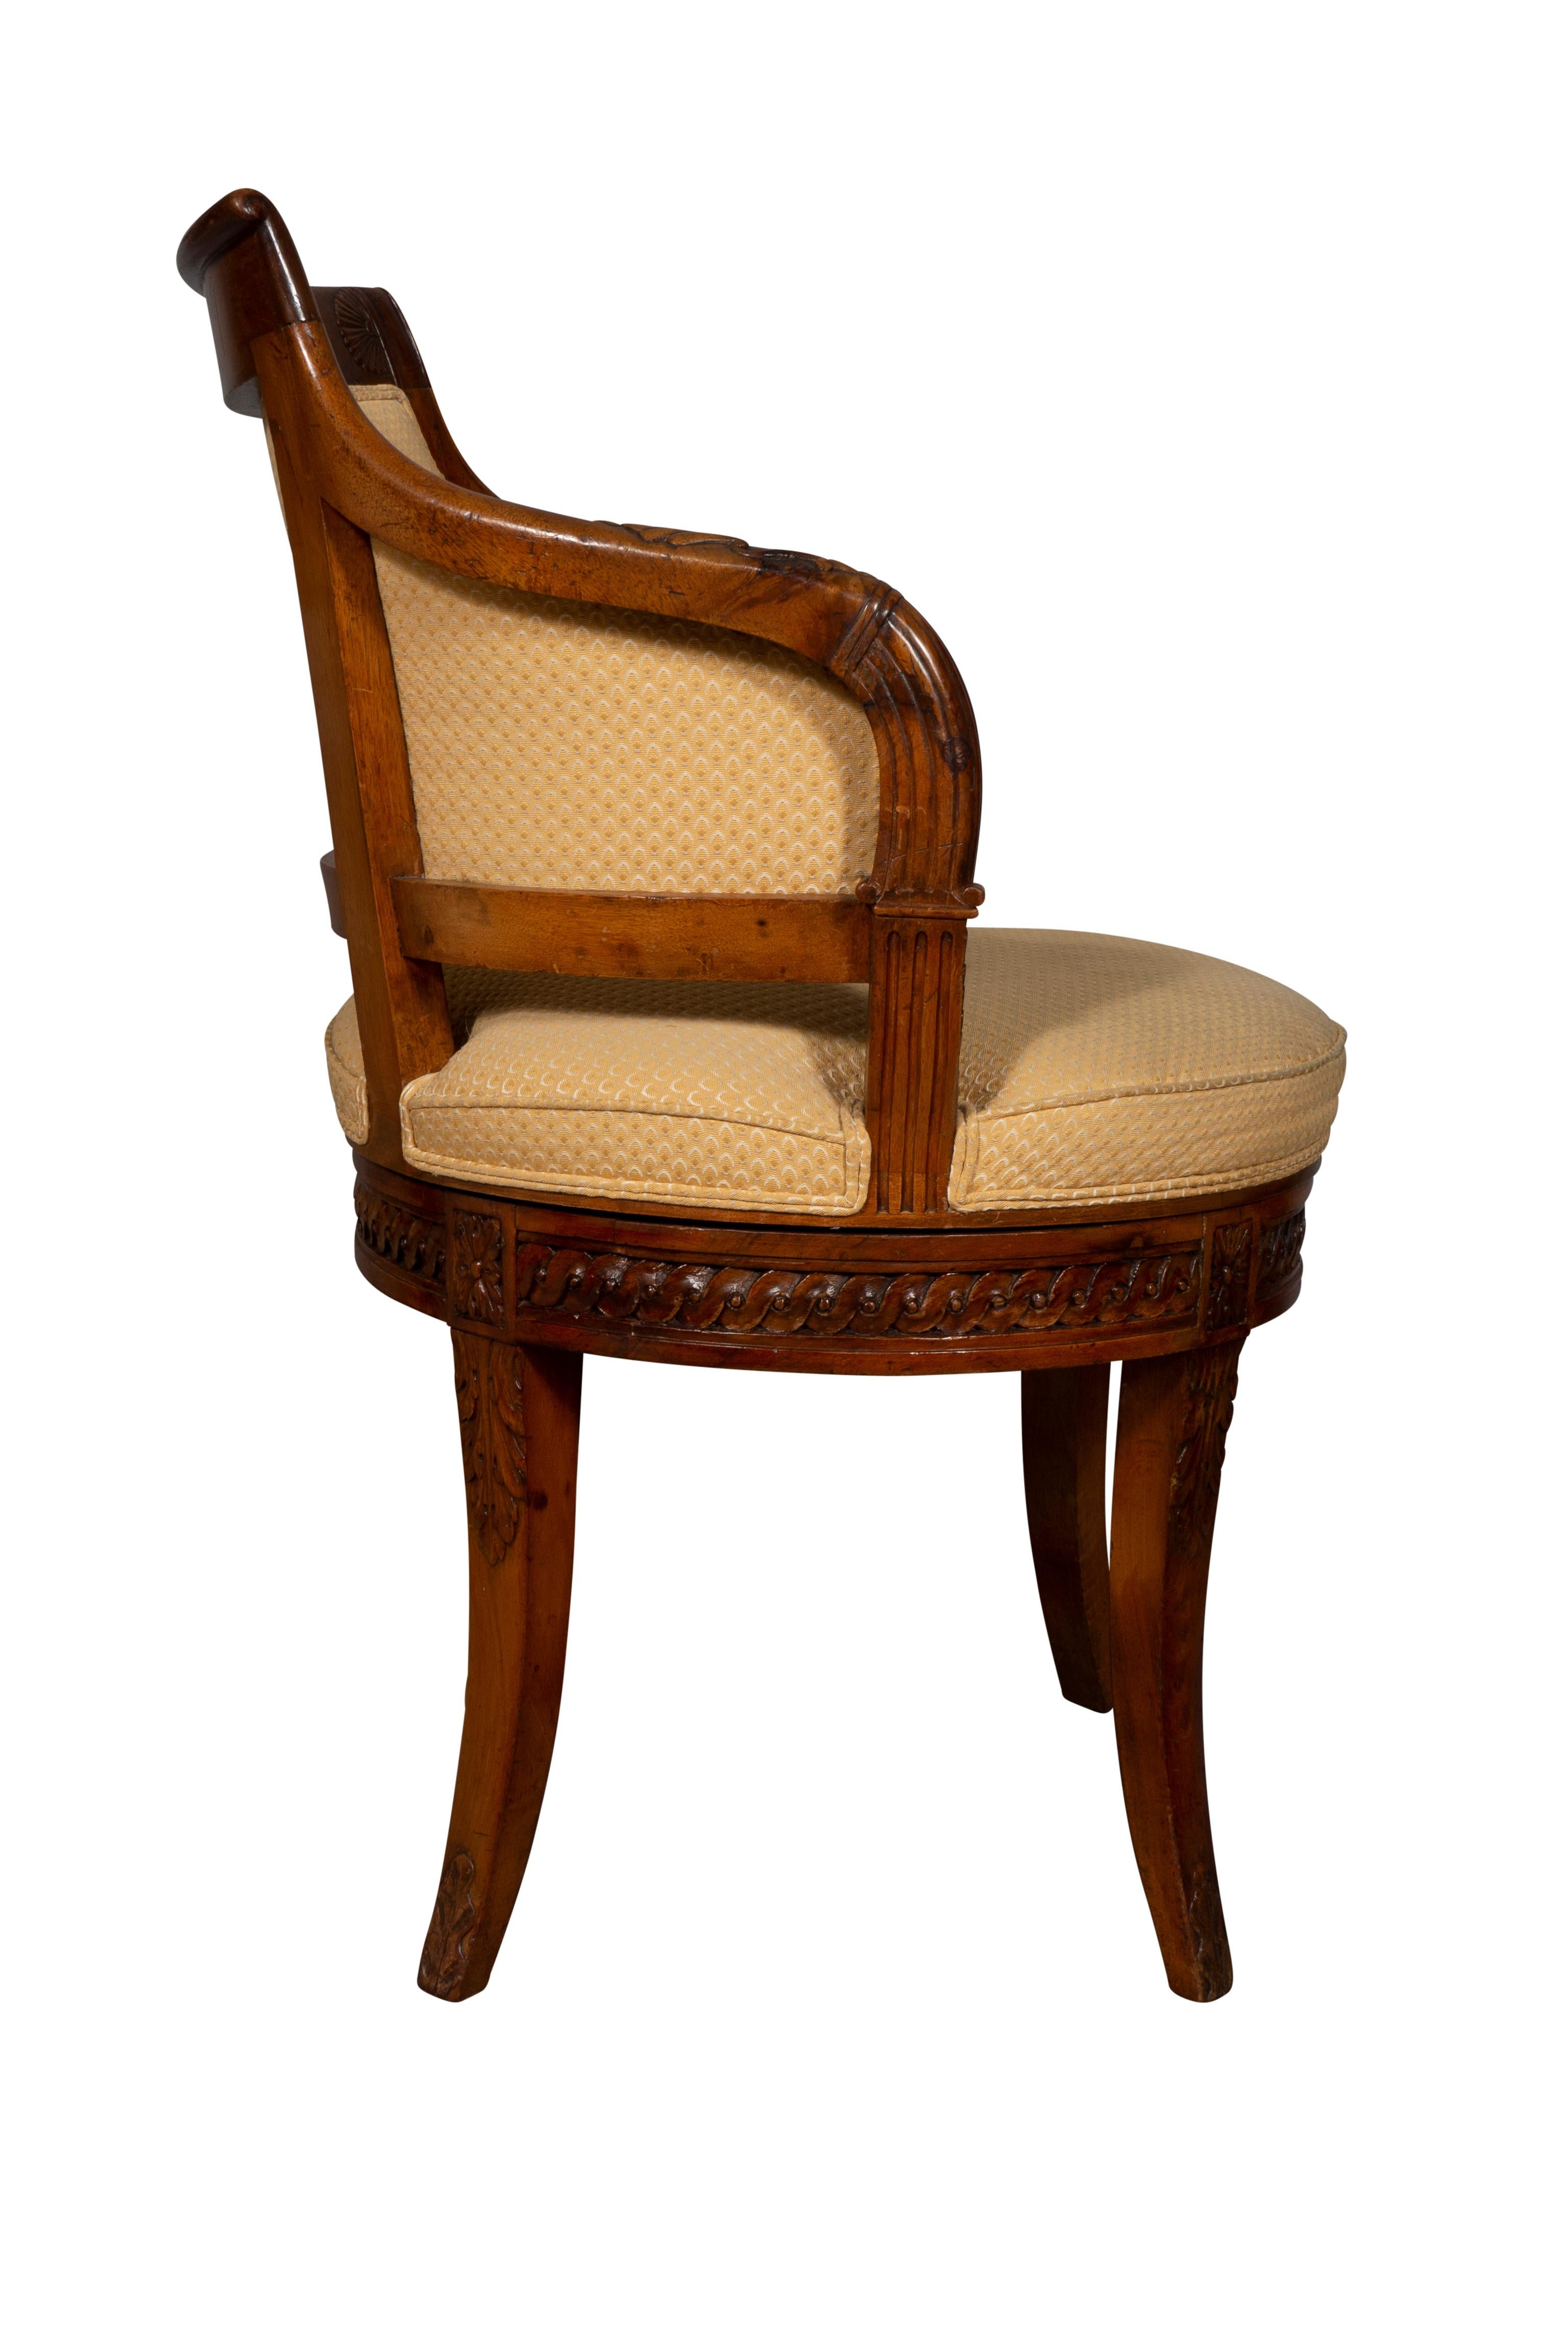 The curved back with crest rail carved with a central urn, the carved down swept arms joining the seat. The seat swivels. The seat rail with guilloche carving, raised on carved tapered saber legs. Needs reupholstery. Frame solid.